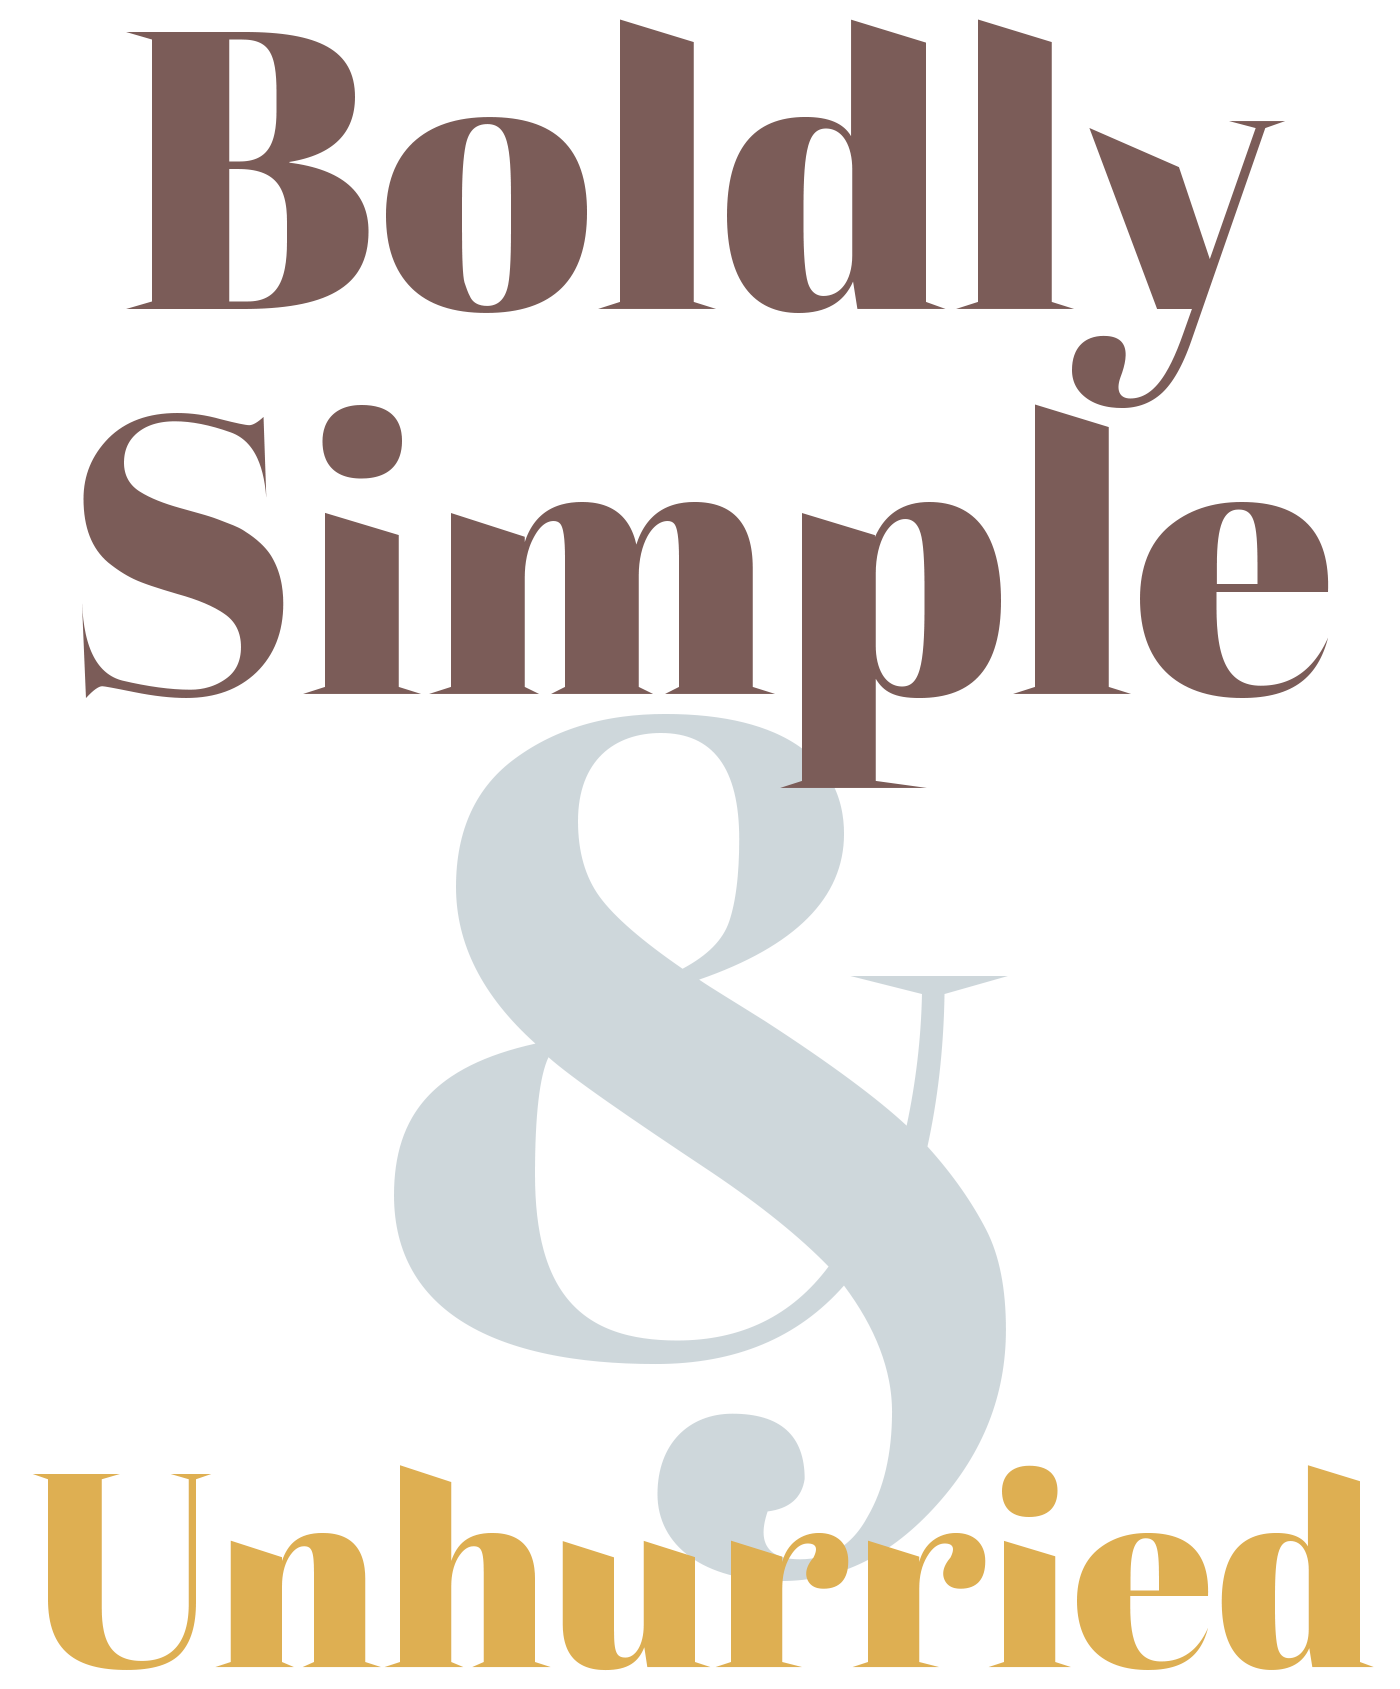 Boldly Simple & Unhurried title